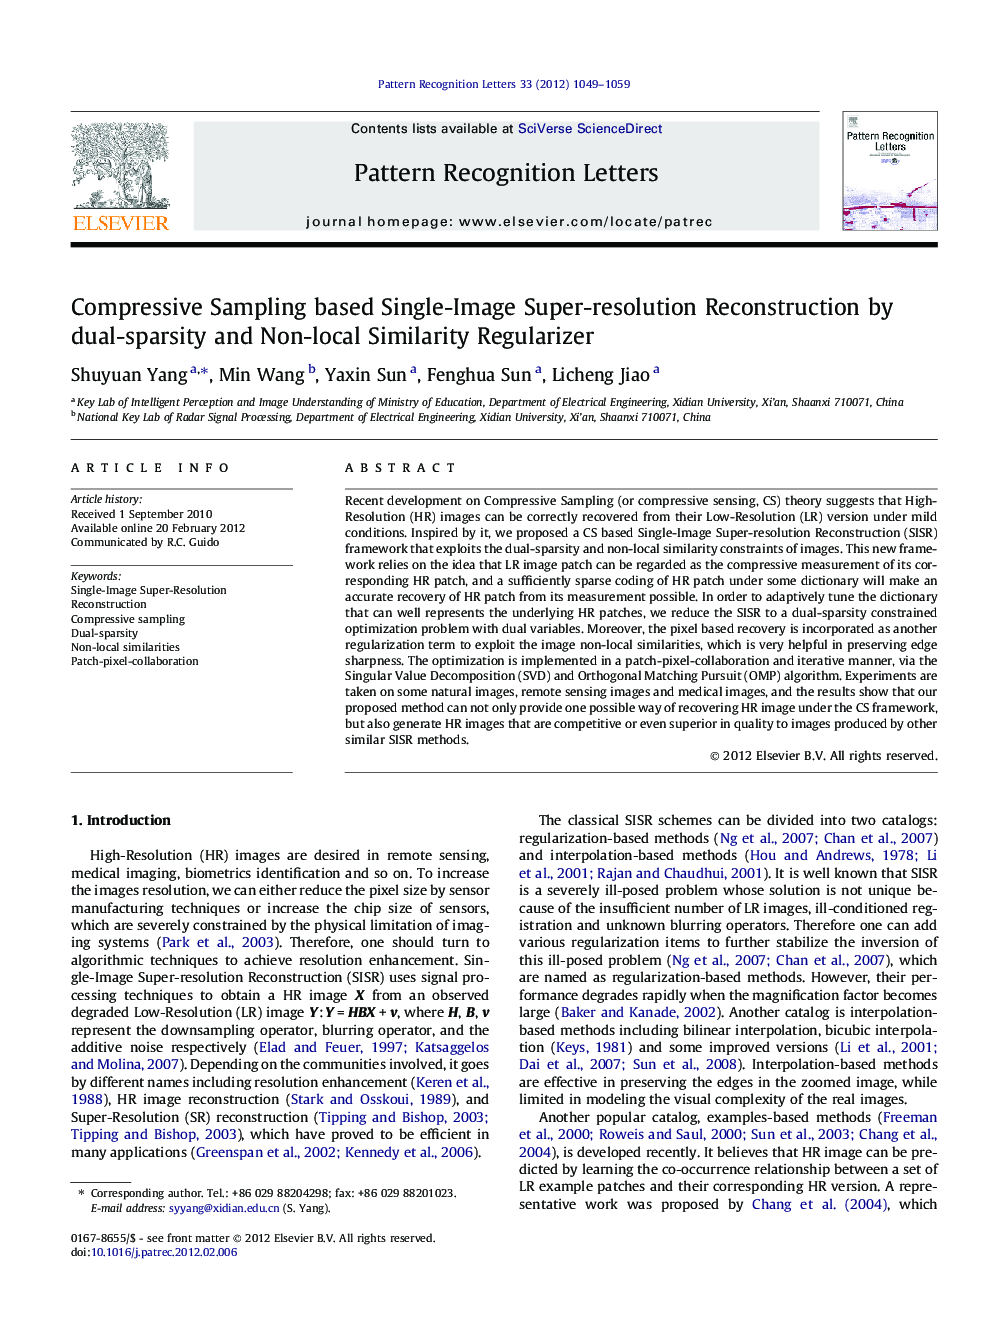 Compressive Sampling based Single-Image Super-resolution Reconstruction by dual-sparsity and Non-local Similarity Regularizer